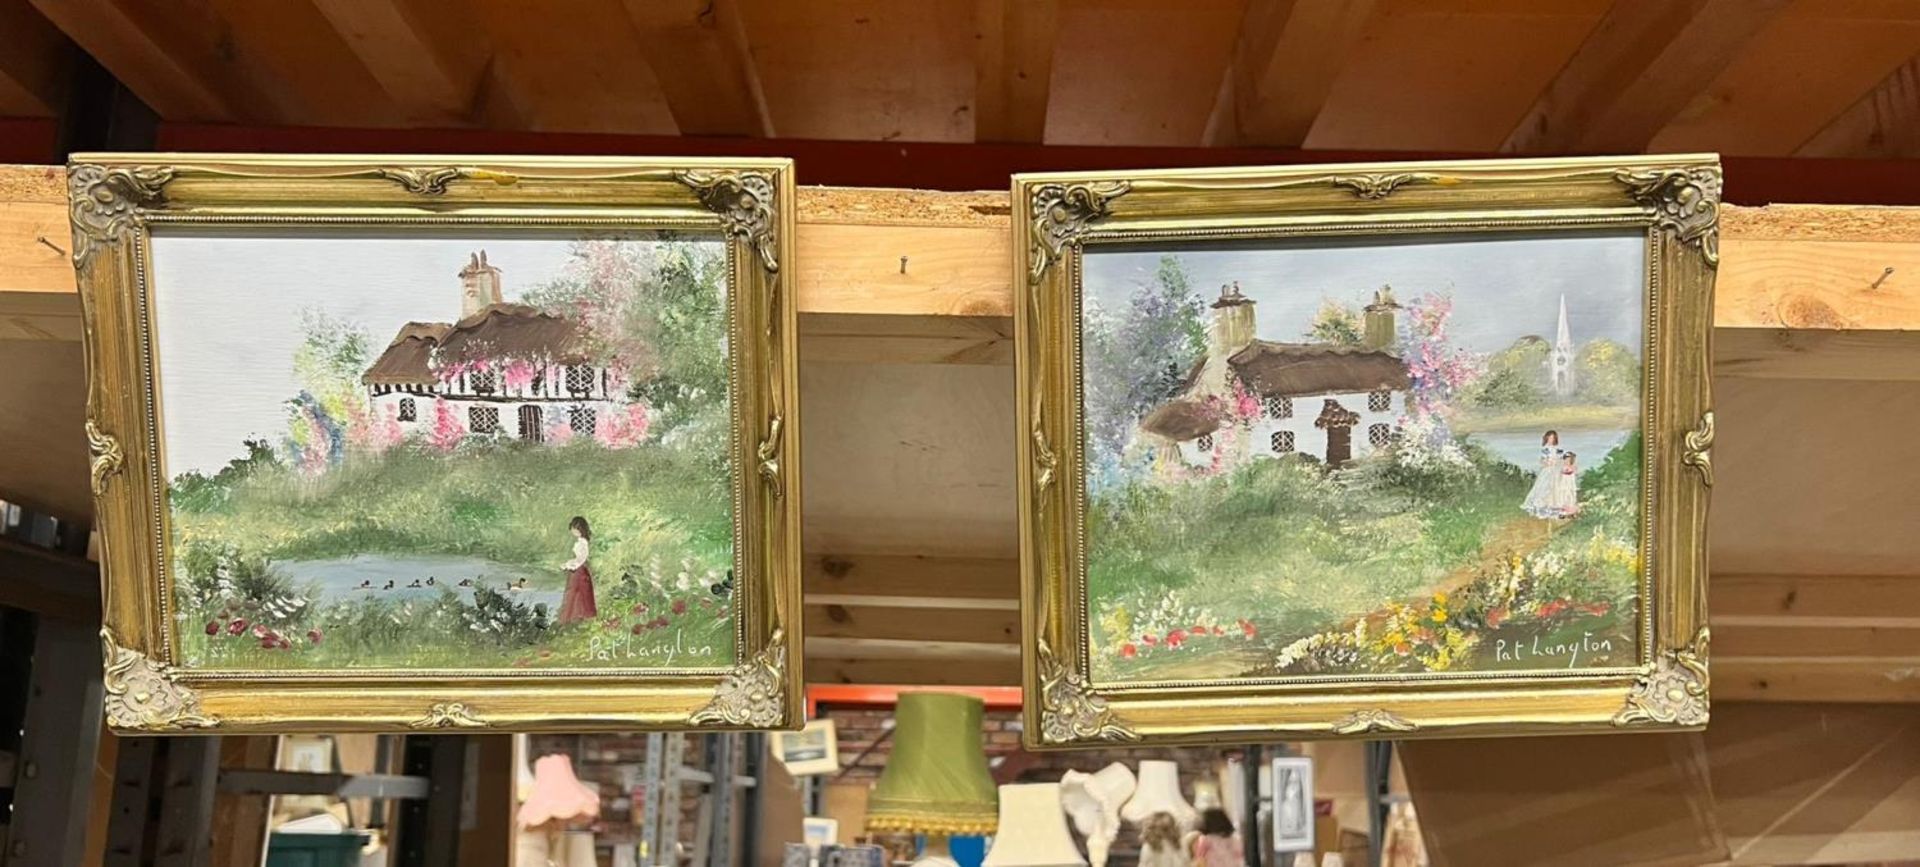 TWO PAT LANGTON SIGNED OILS ON BOARD OF COTTAGE SCENES, ONE WITH A BRIDE AND BRIDESMAID, THE OTHER A